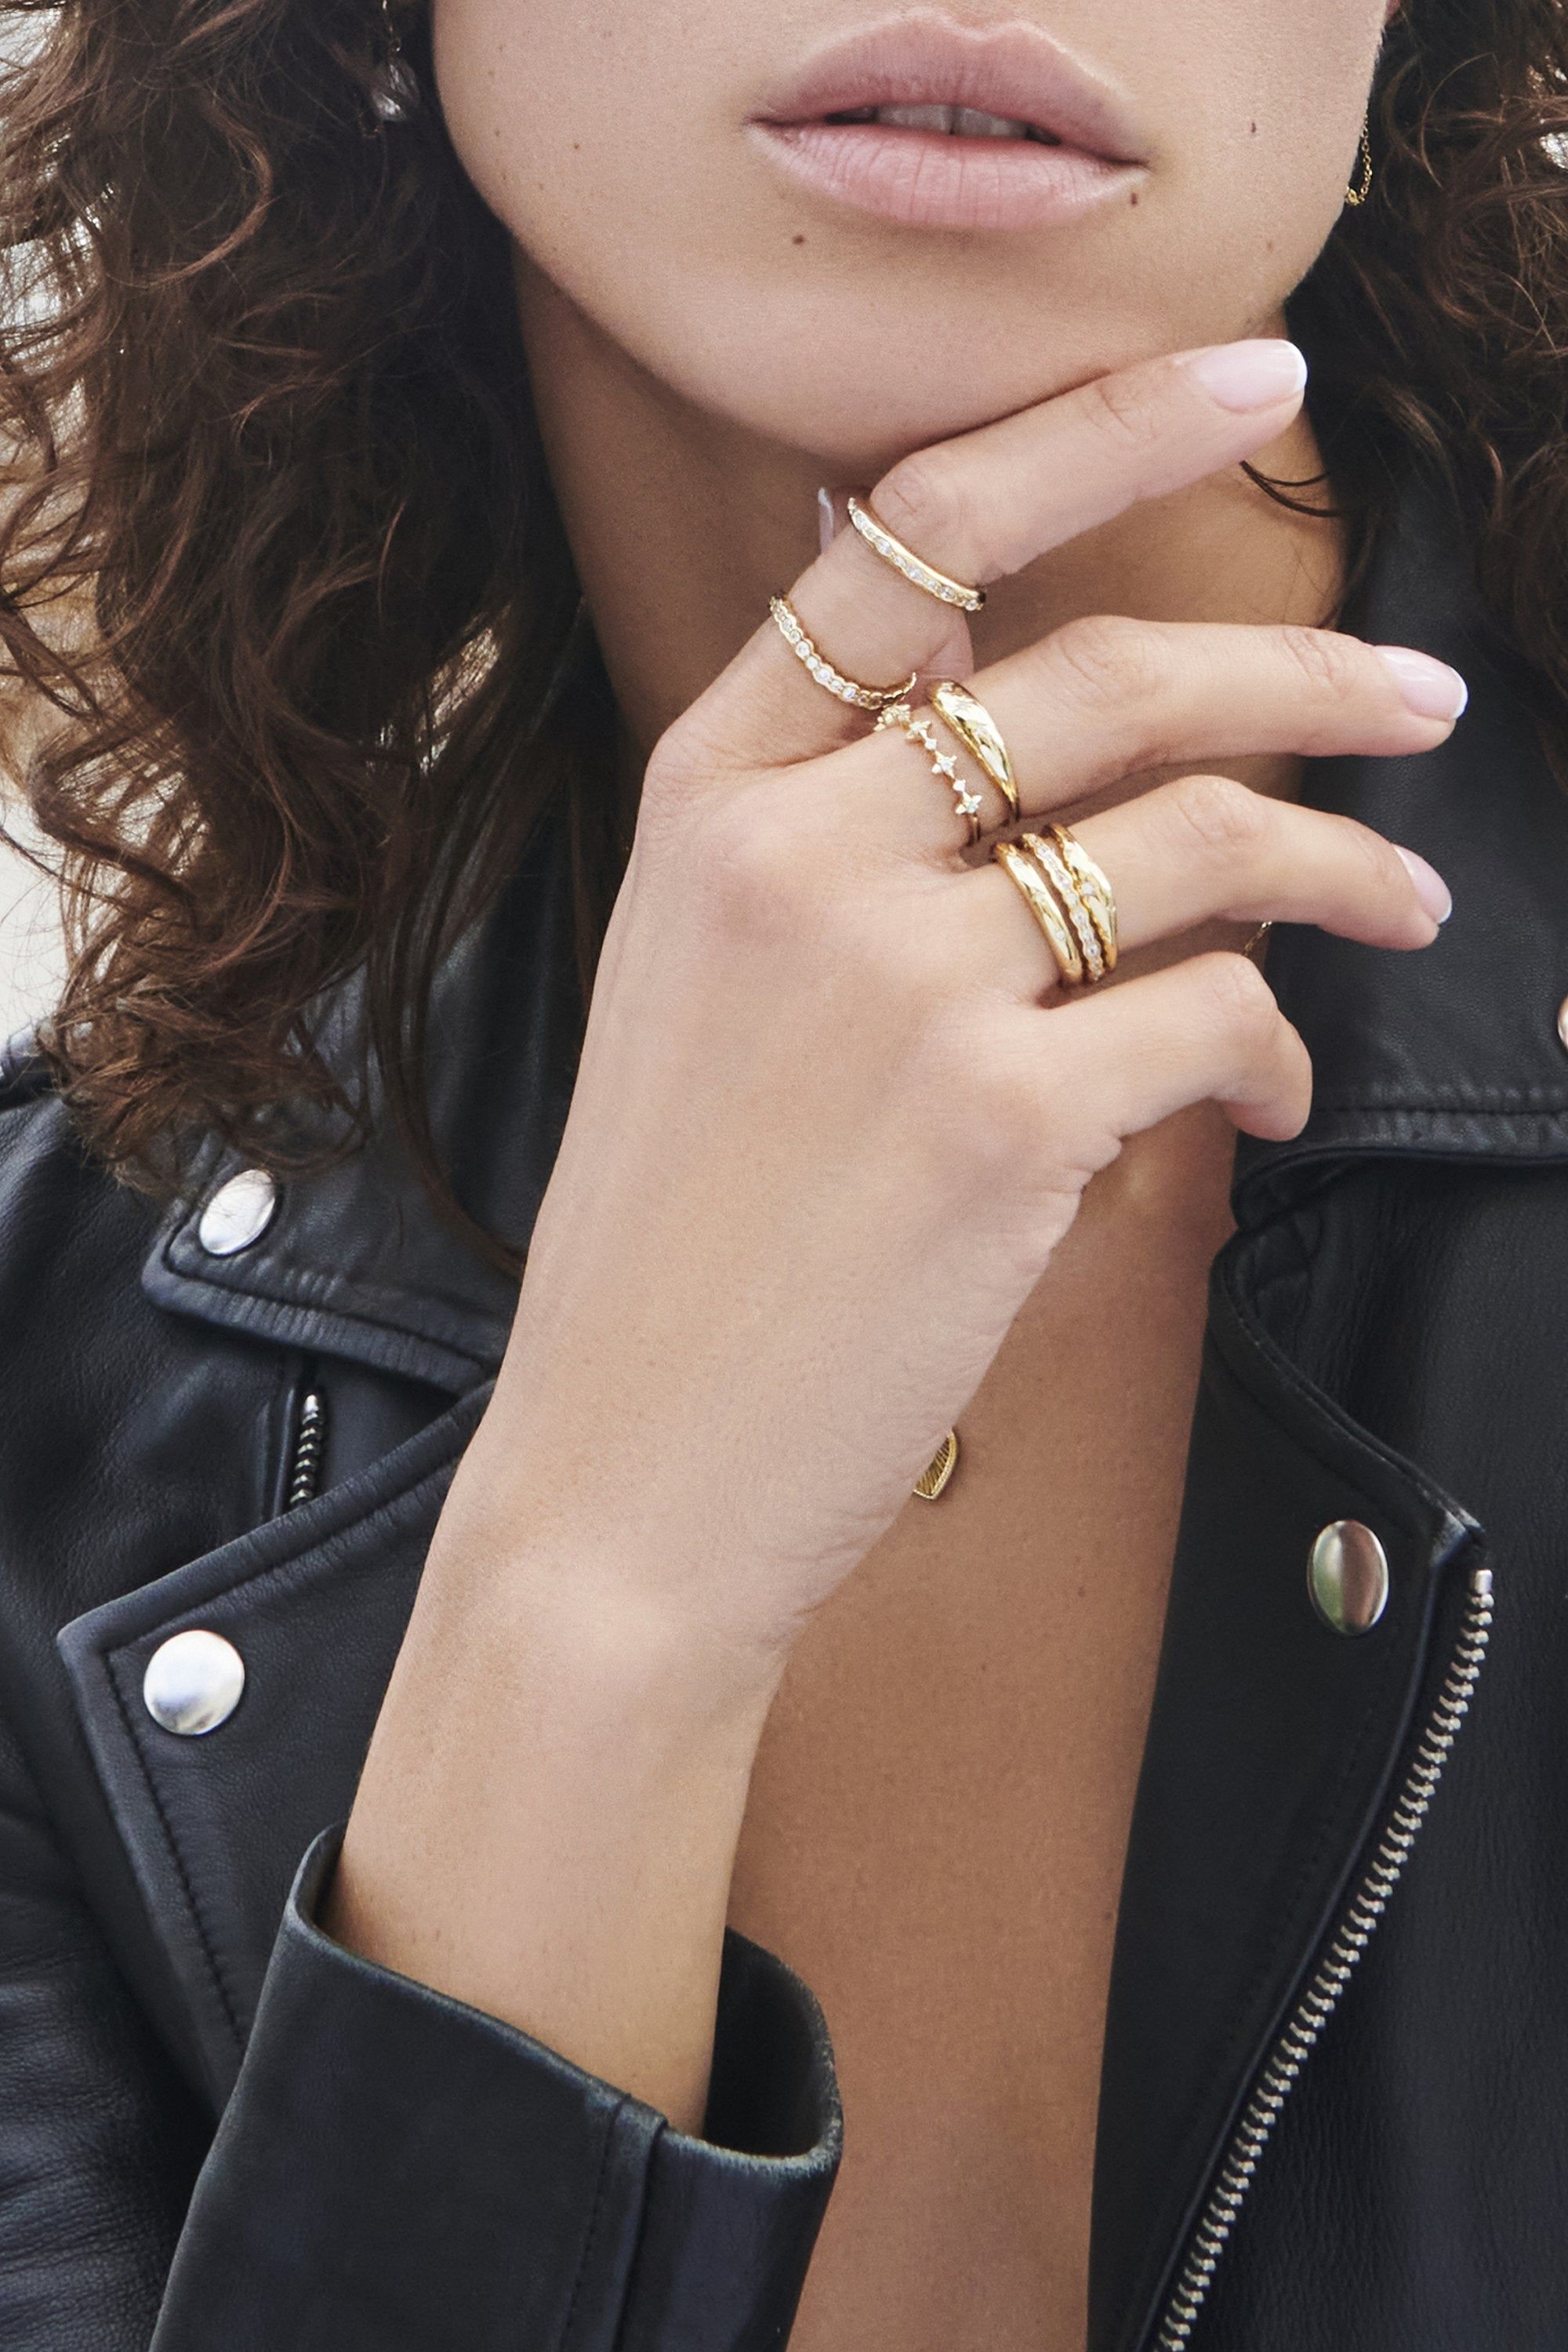 a woman wearing a black leather jacket and gold rings